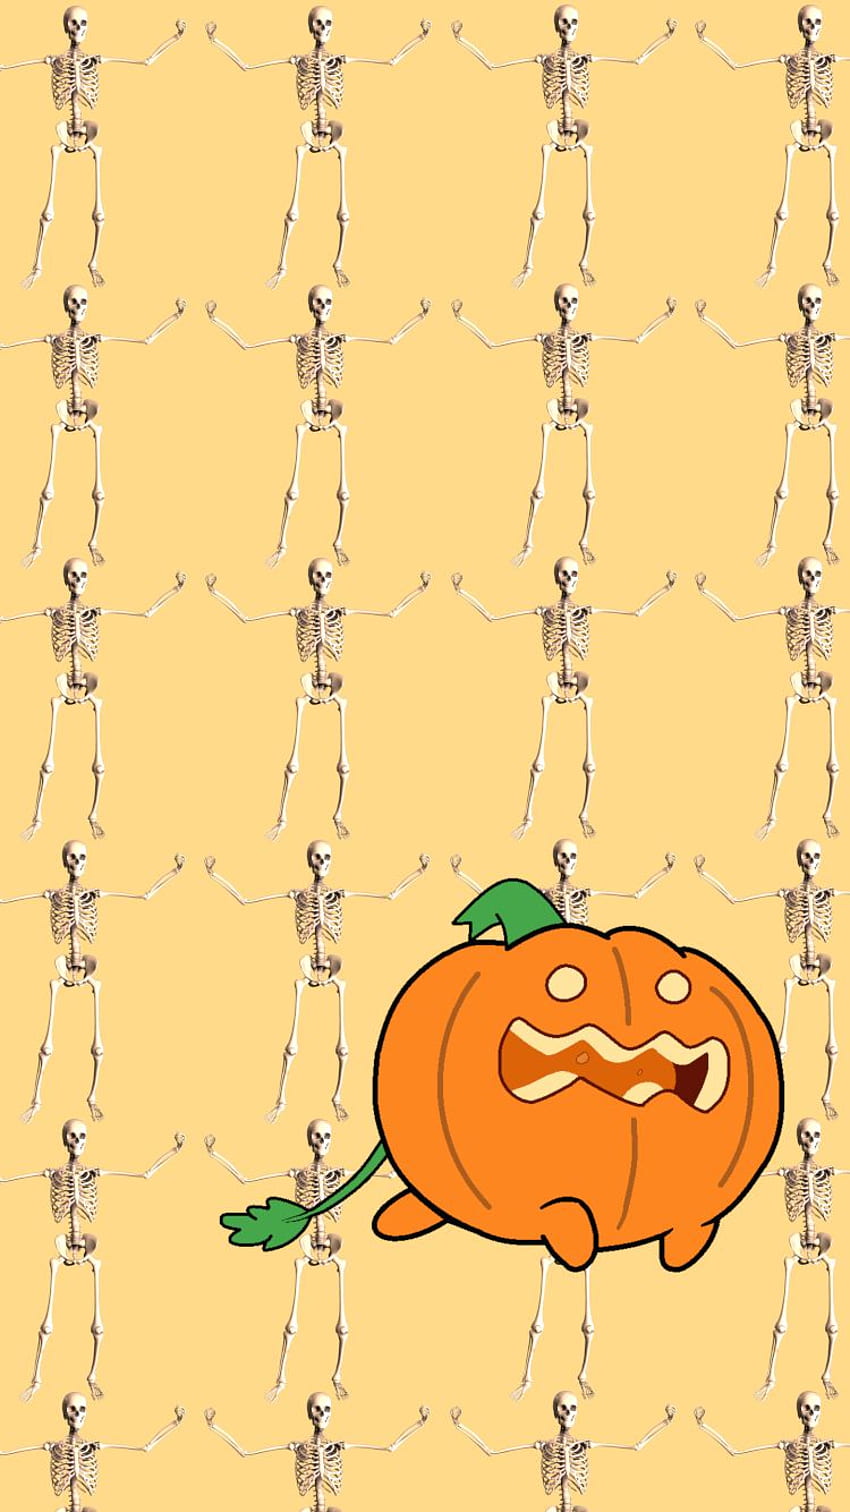 Spooky Scary Skeletons I made another . Link to my HD phone wallpaper